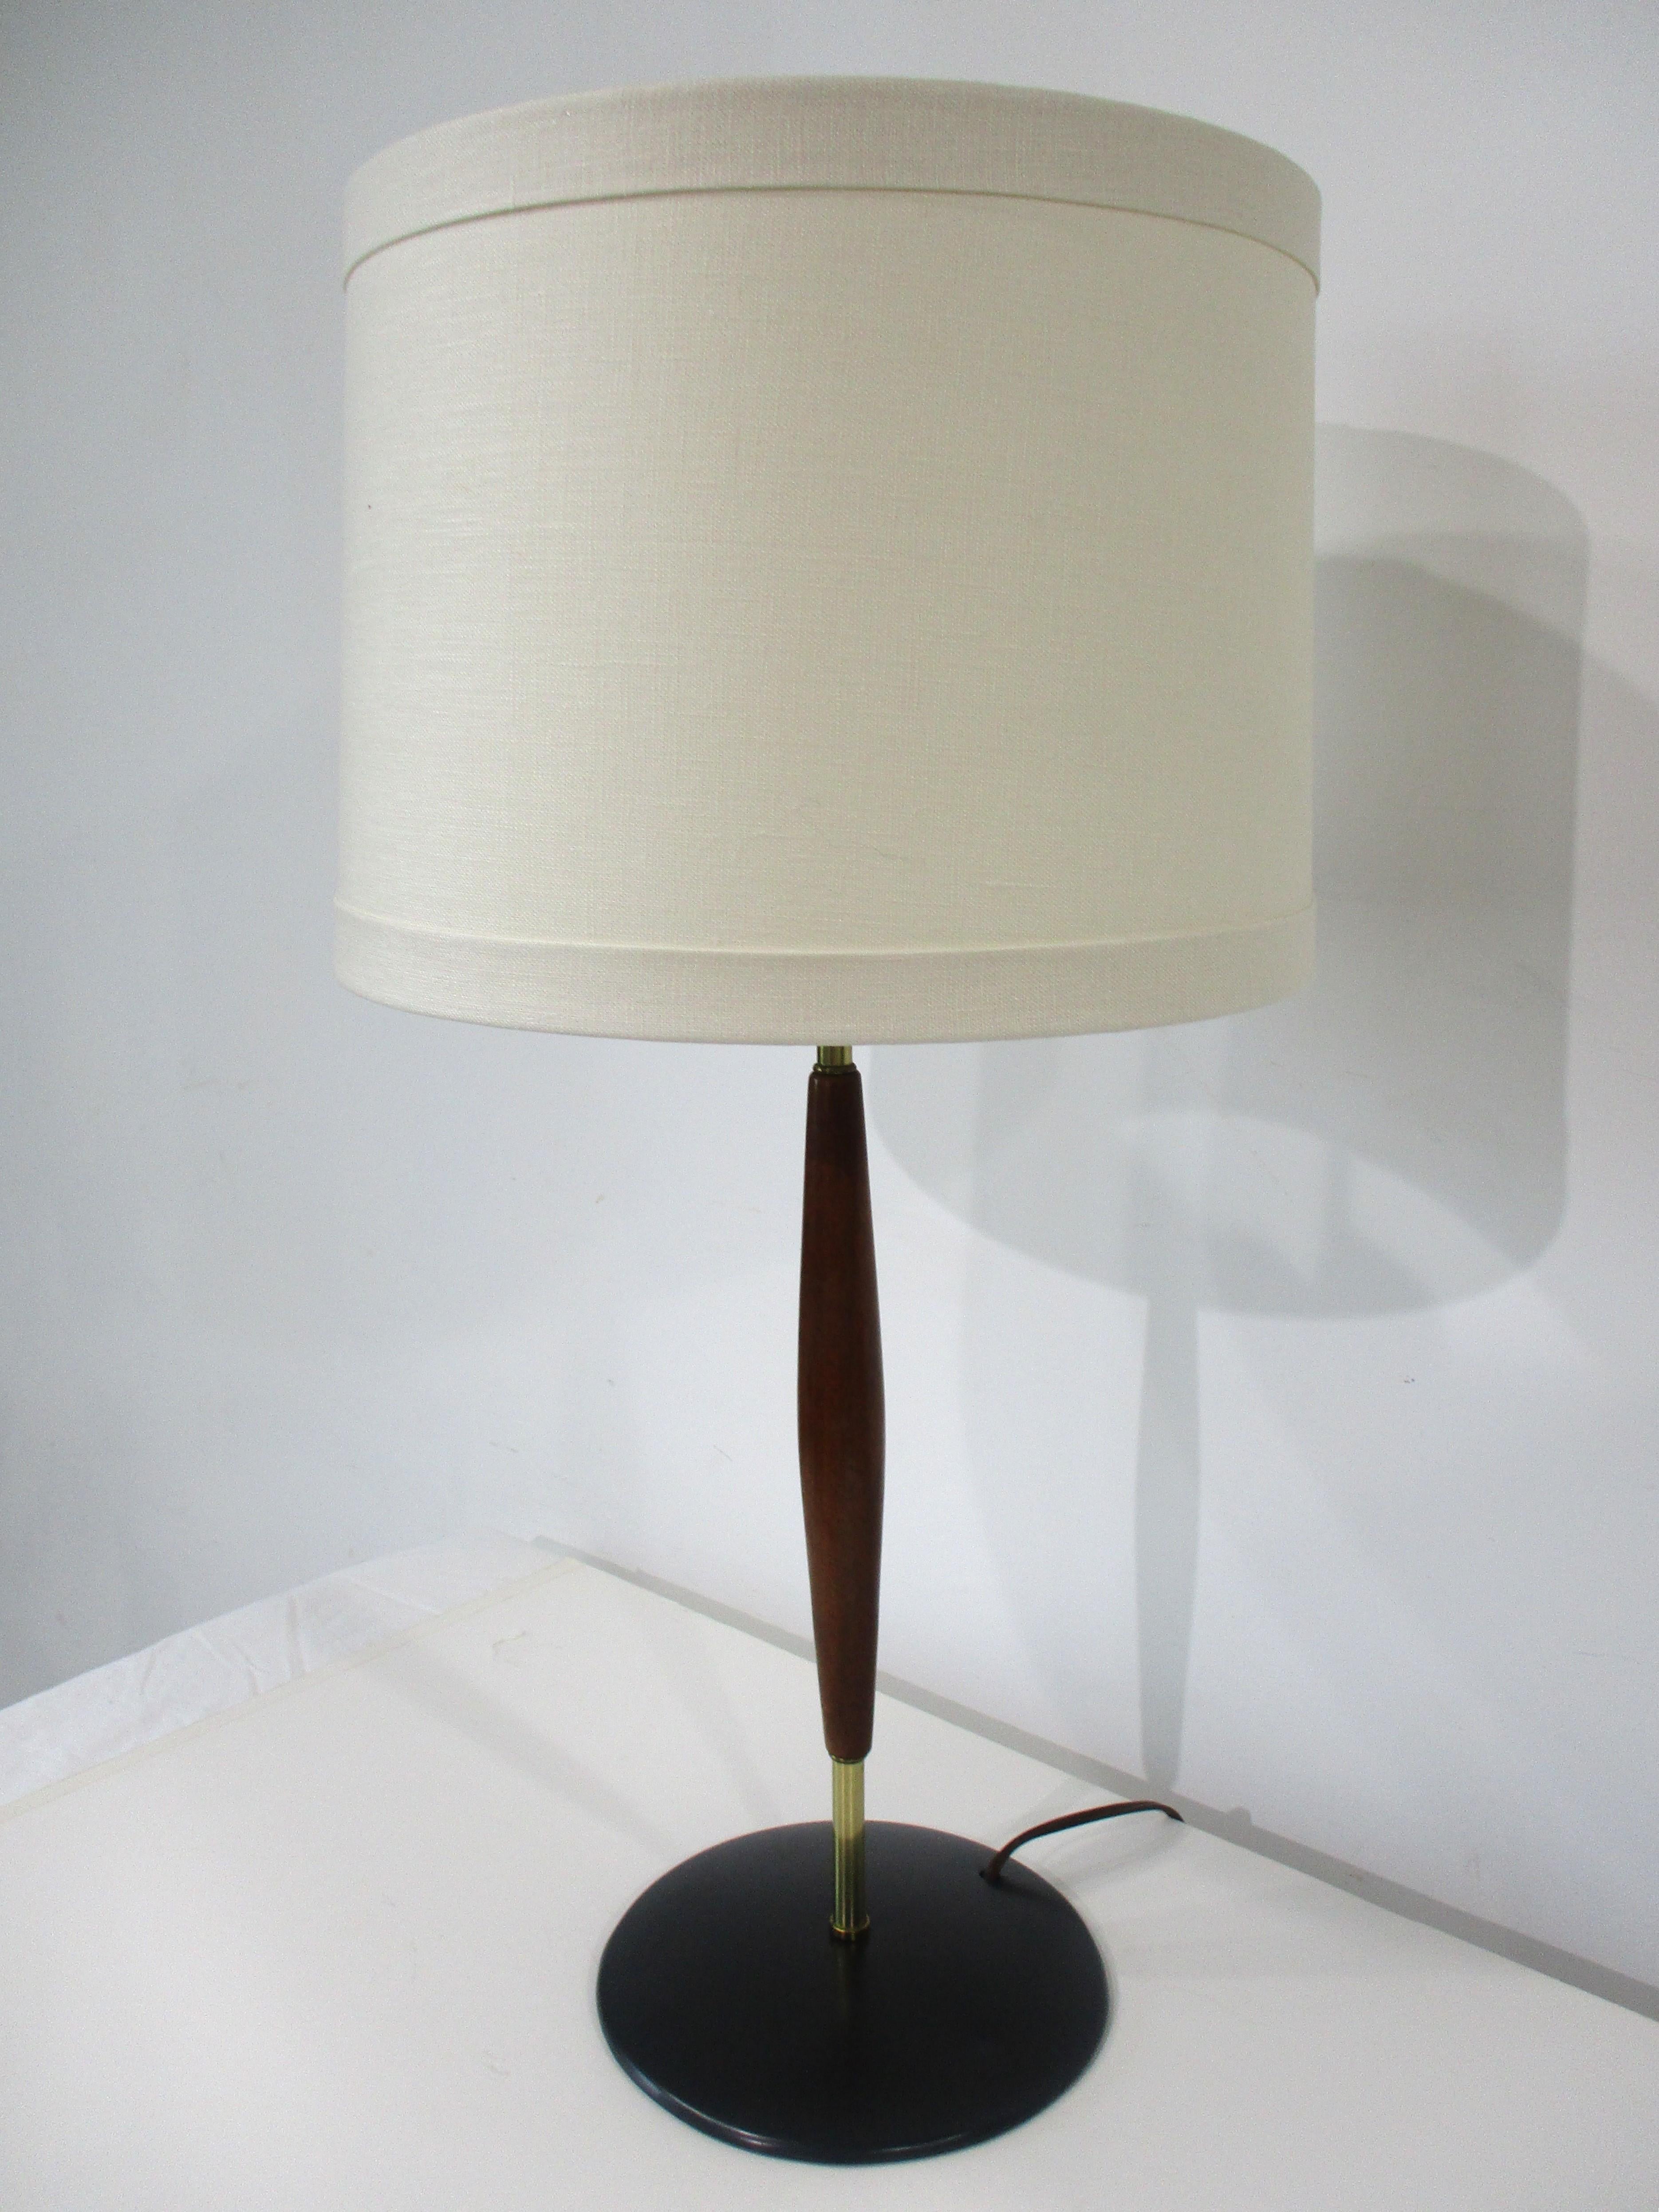 A very well tailored table lamp with black metal base , brass and walnut shaft  accented and topped with a oatmeal toned linen shade . A nice touch is the brushed brass final and the upper and lower bands to the shade making it a bit more dramatic